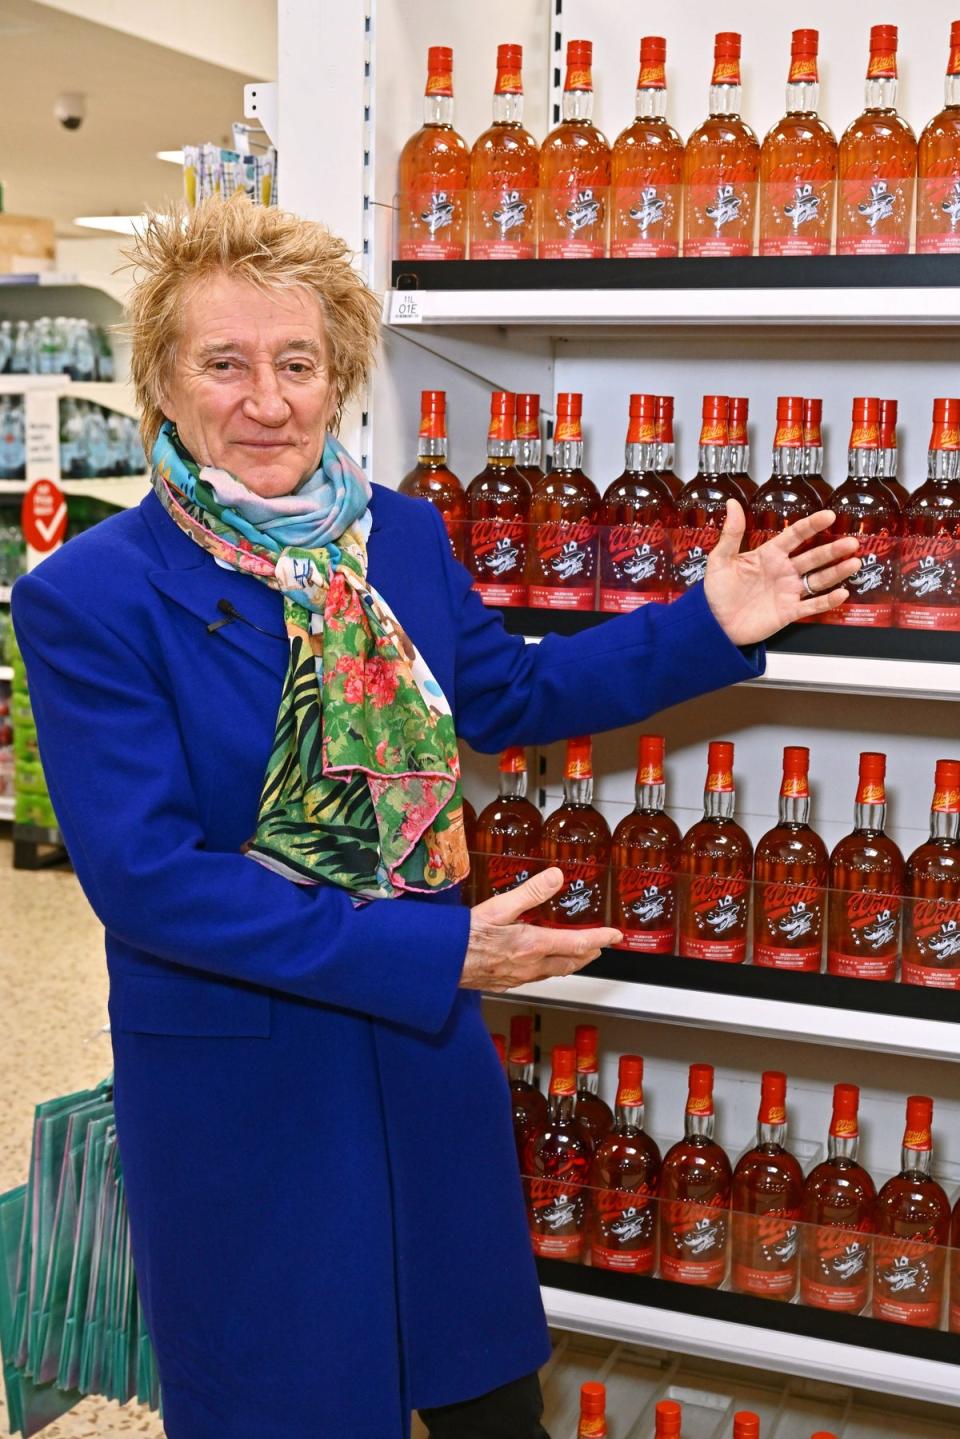 Sir Rod Stewart popped into his local Tescos for the launch of his new whisky brand (Dave Benett)